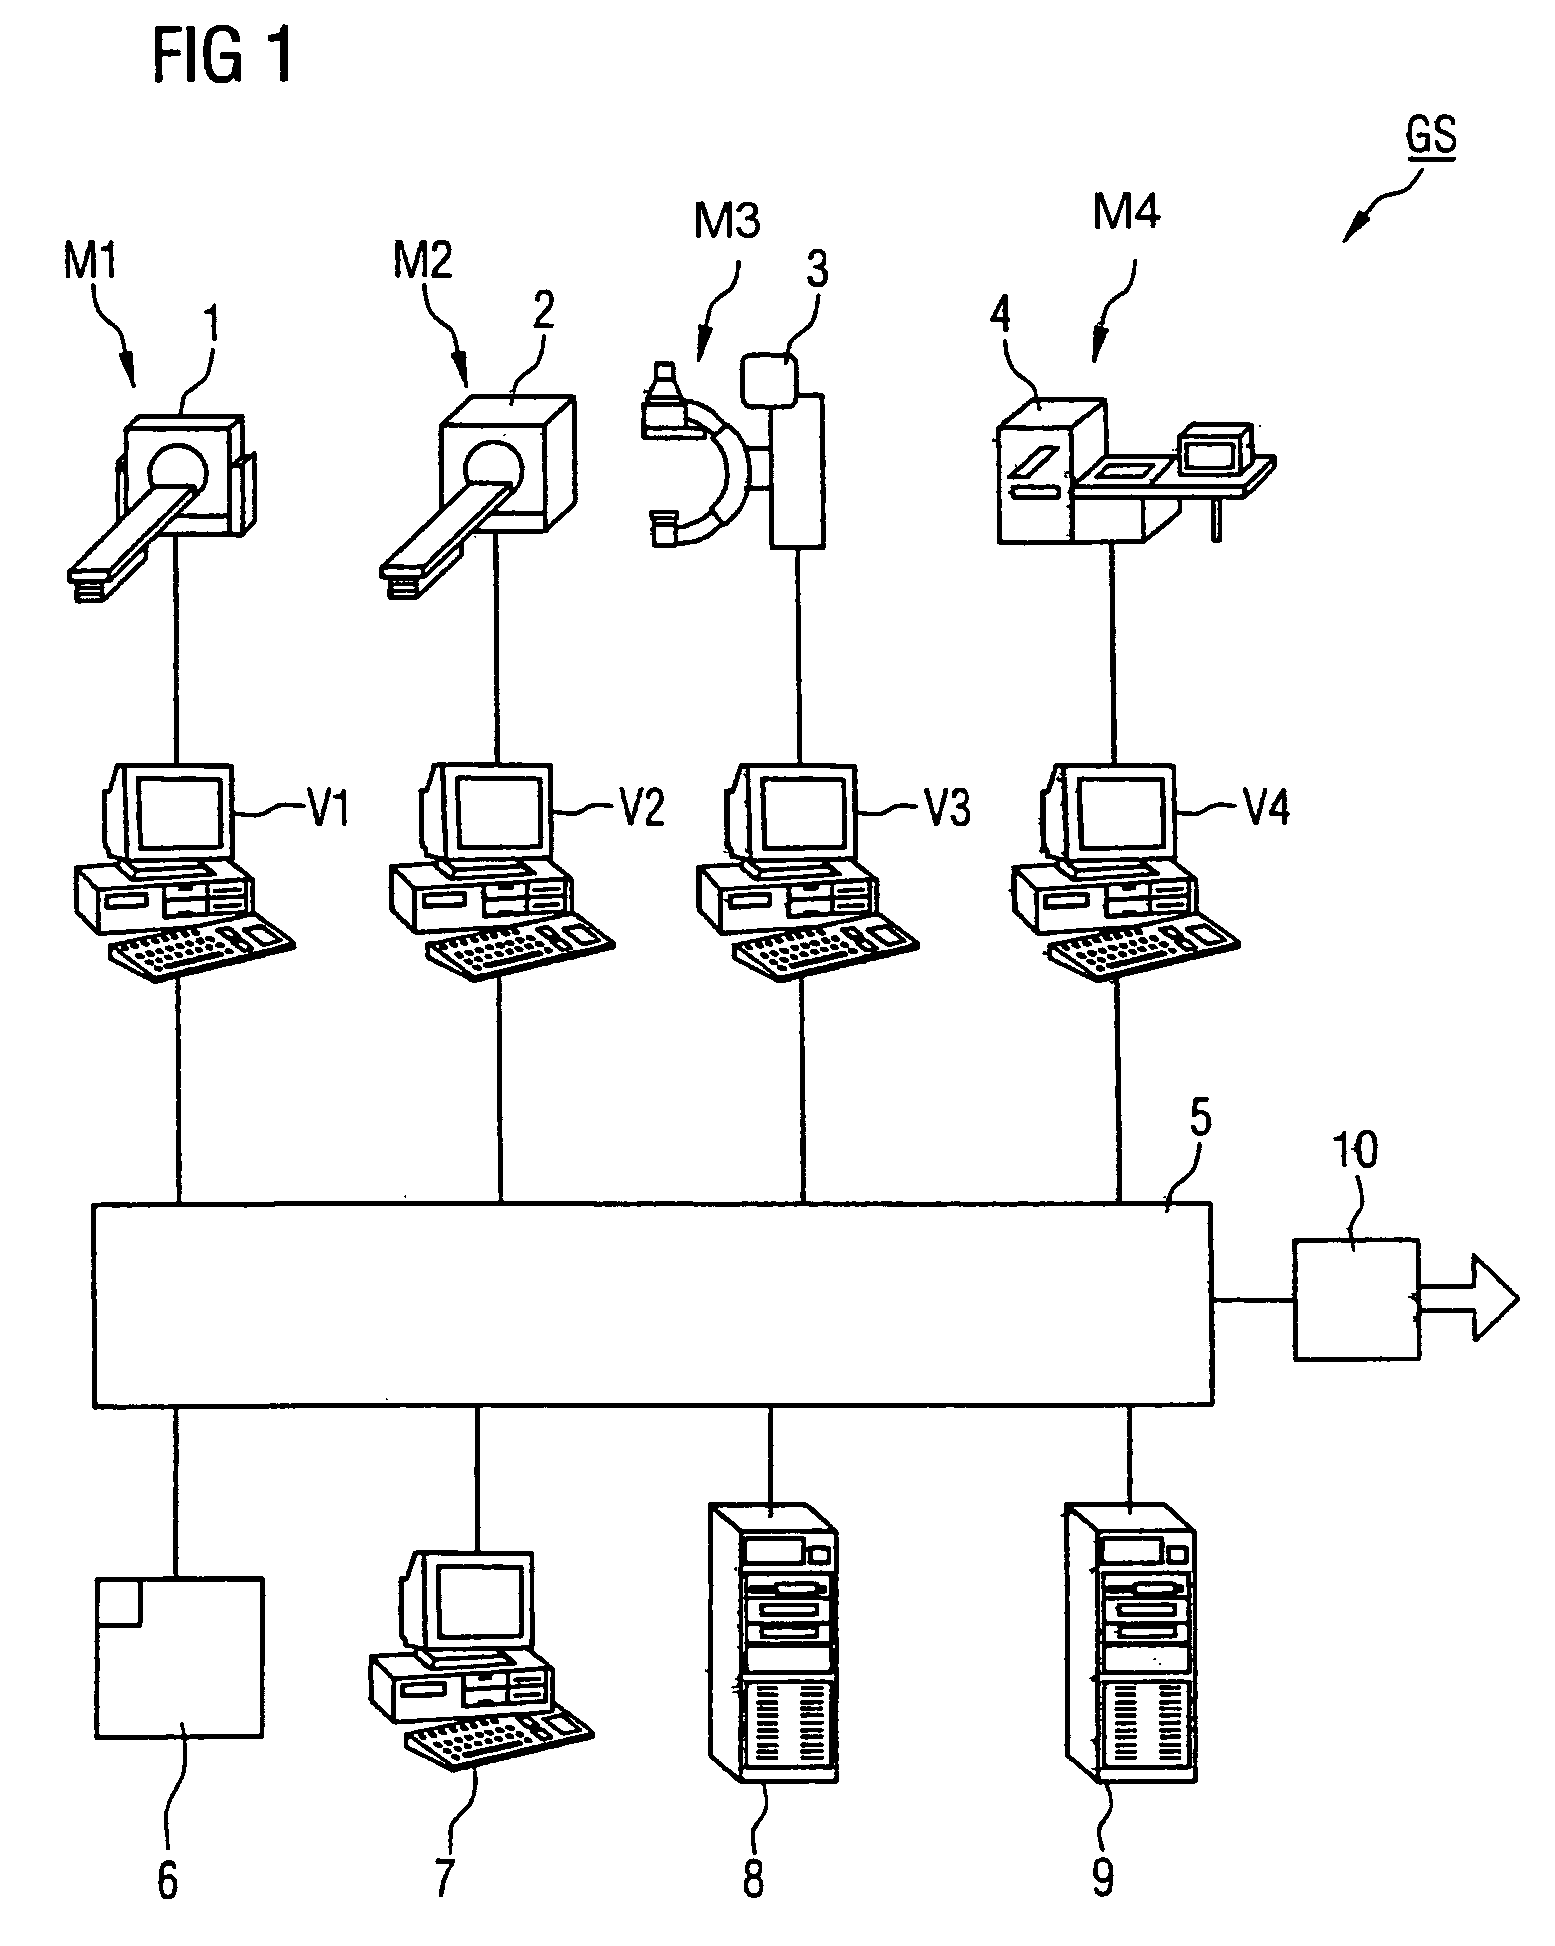 Method and apparatus for processing data, and medical appliance system for processing data